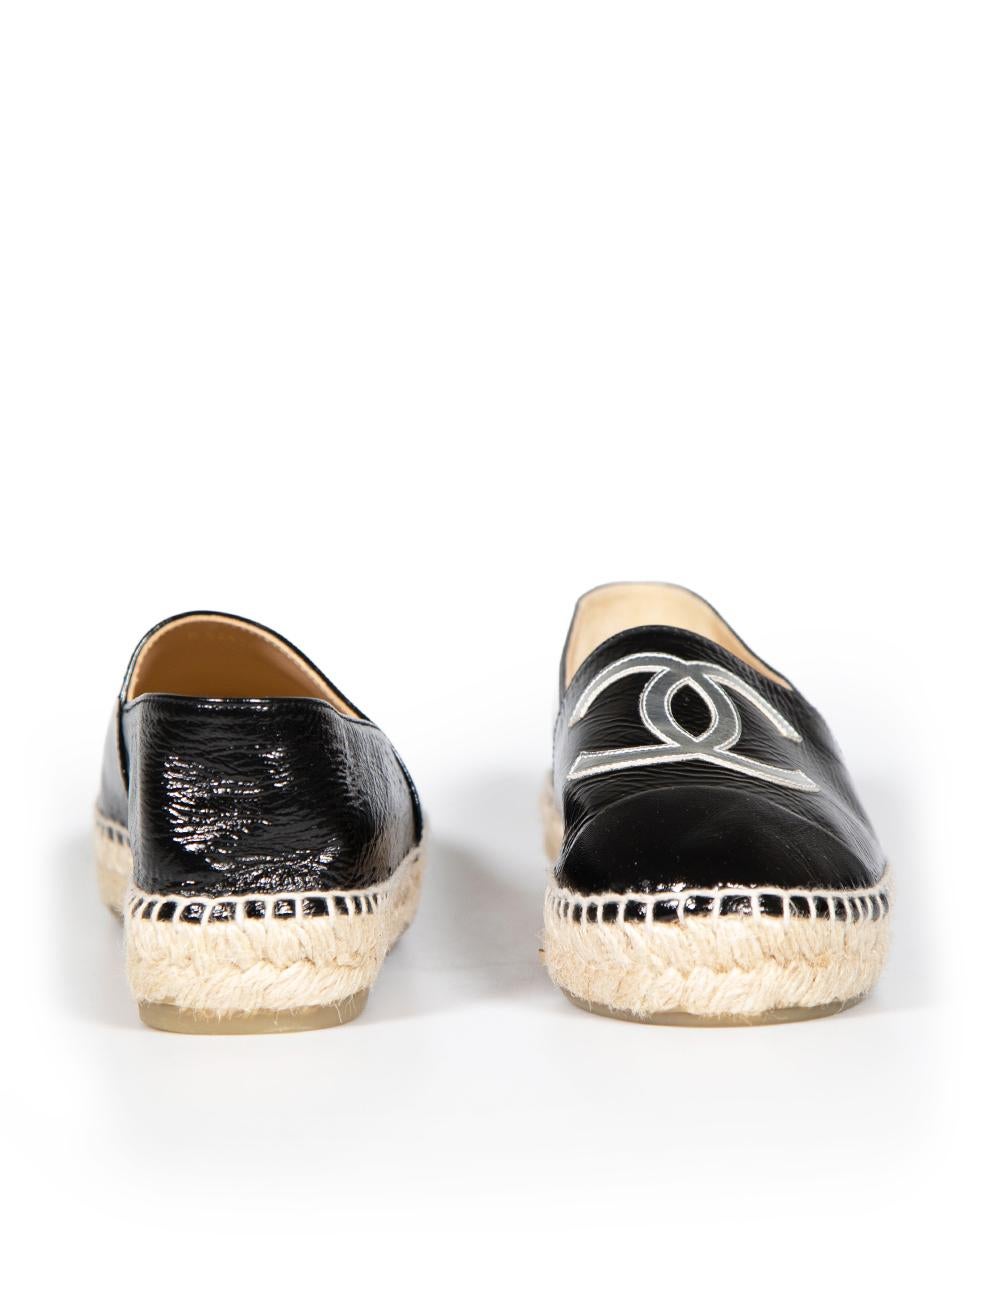 Chanel Black Leather CC Cap Toe Espadrilles Size IT 36 In Excellent Condition For Sale In London, GB